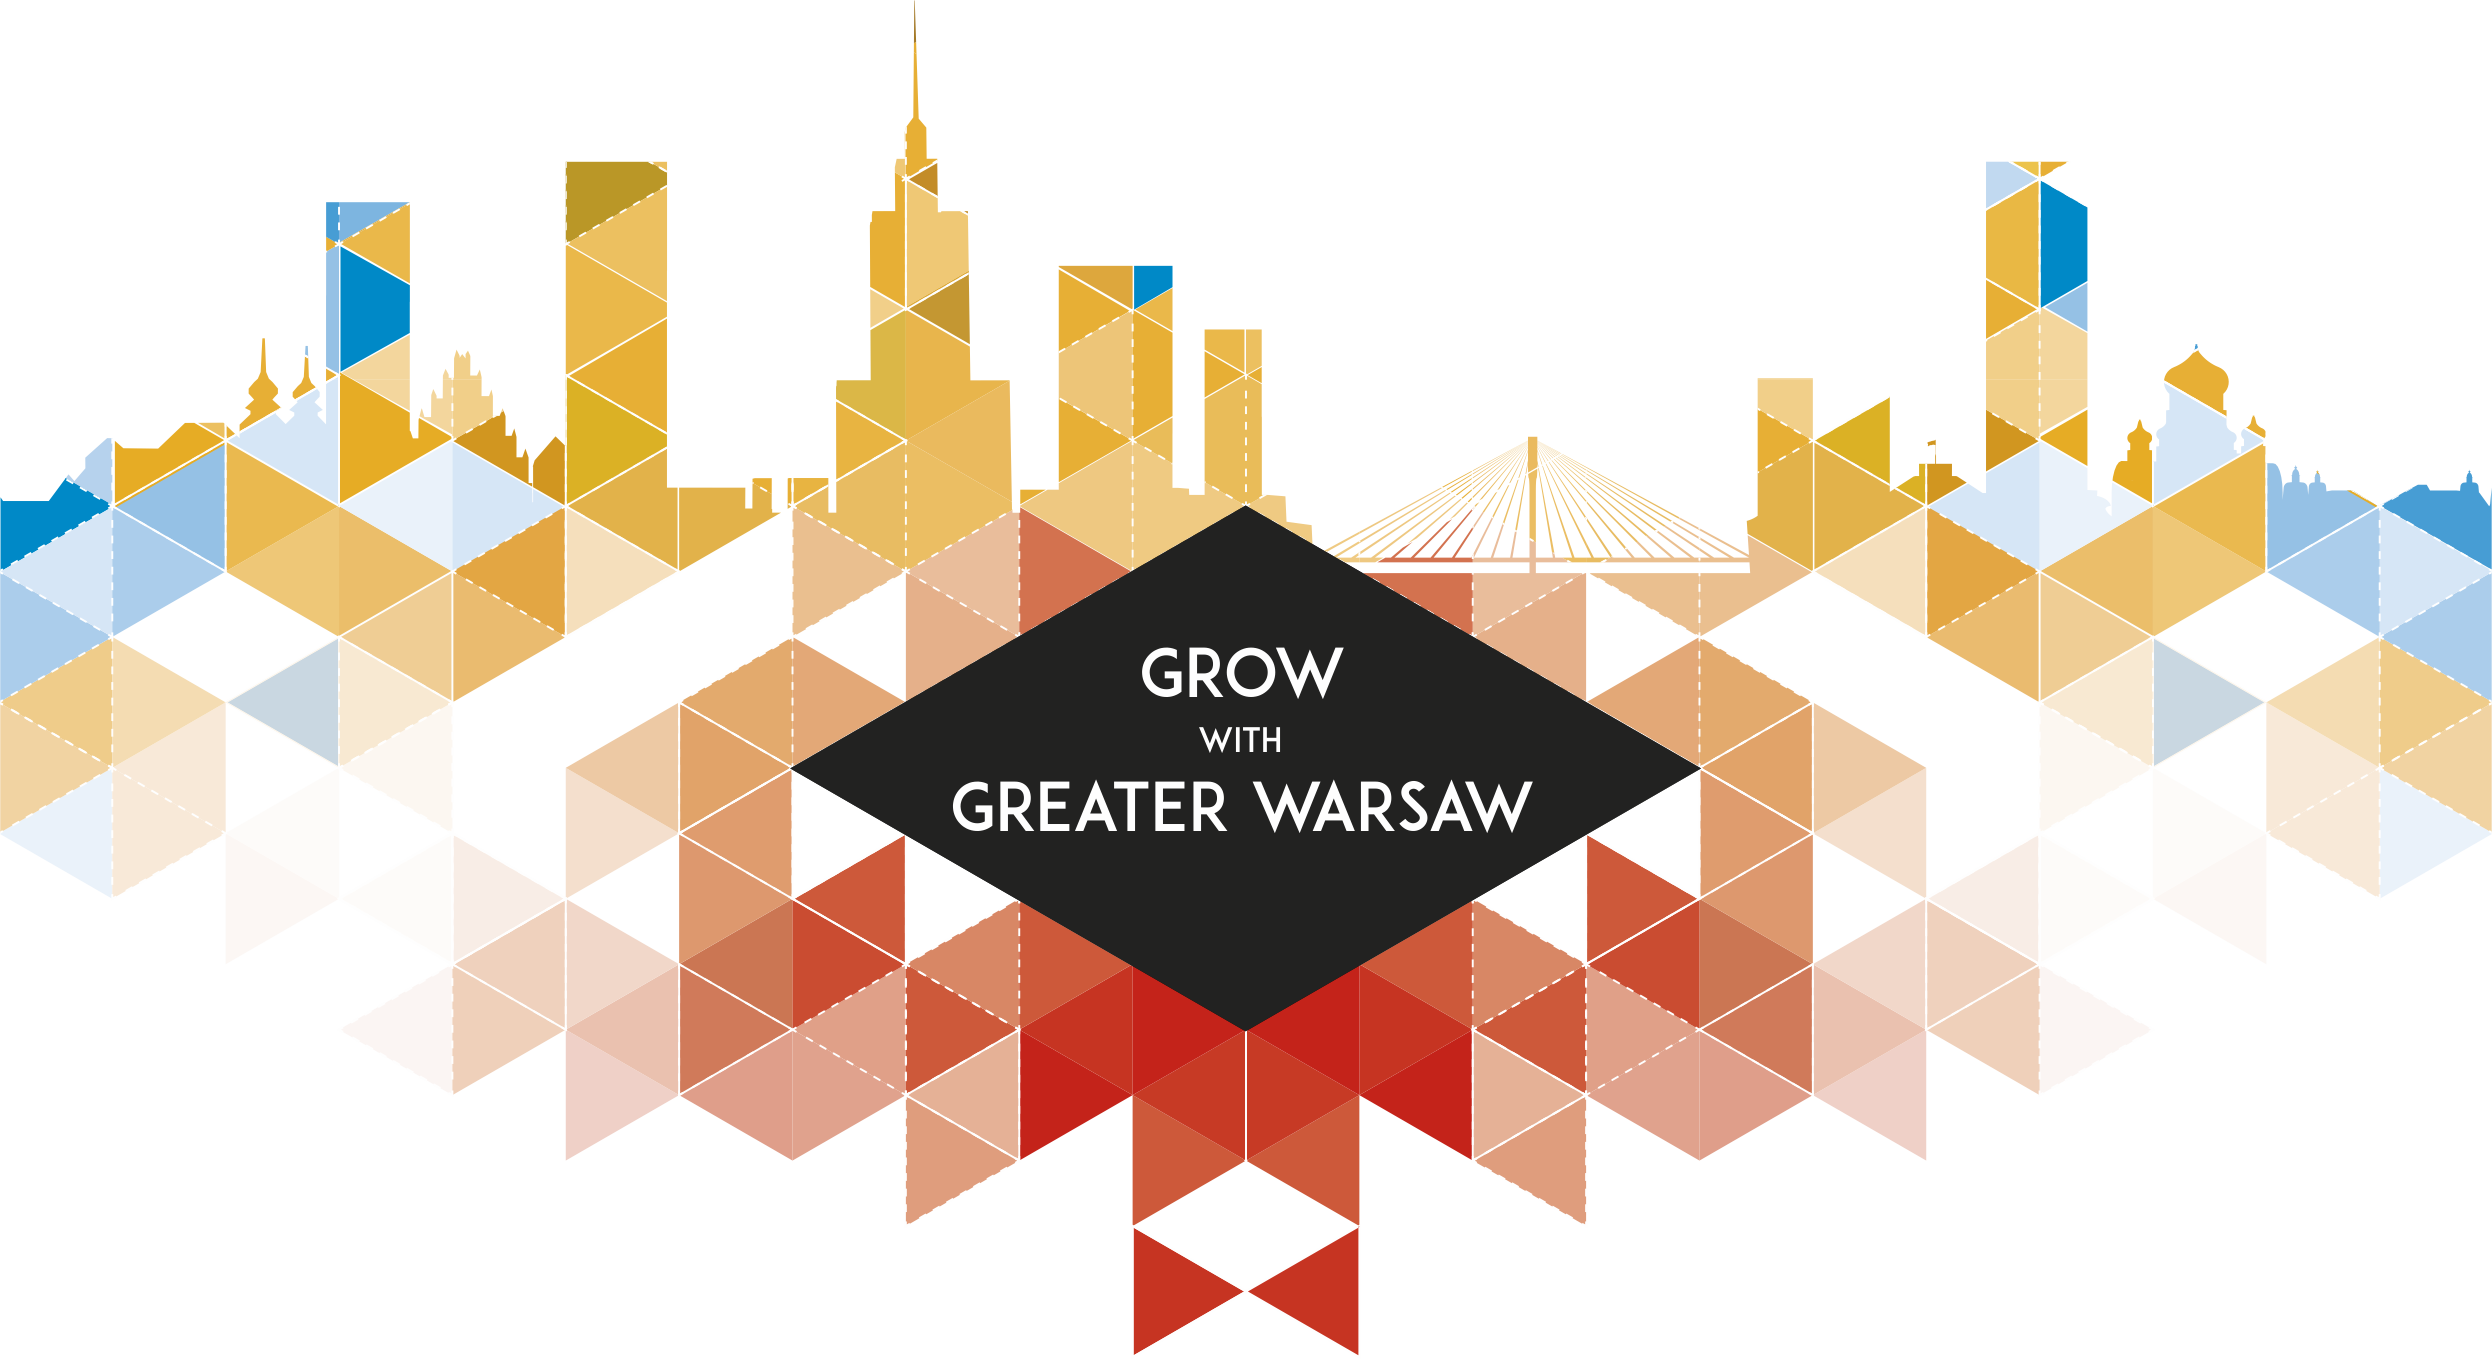 Grow with better Warsaw